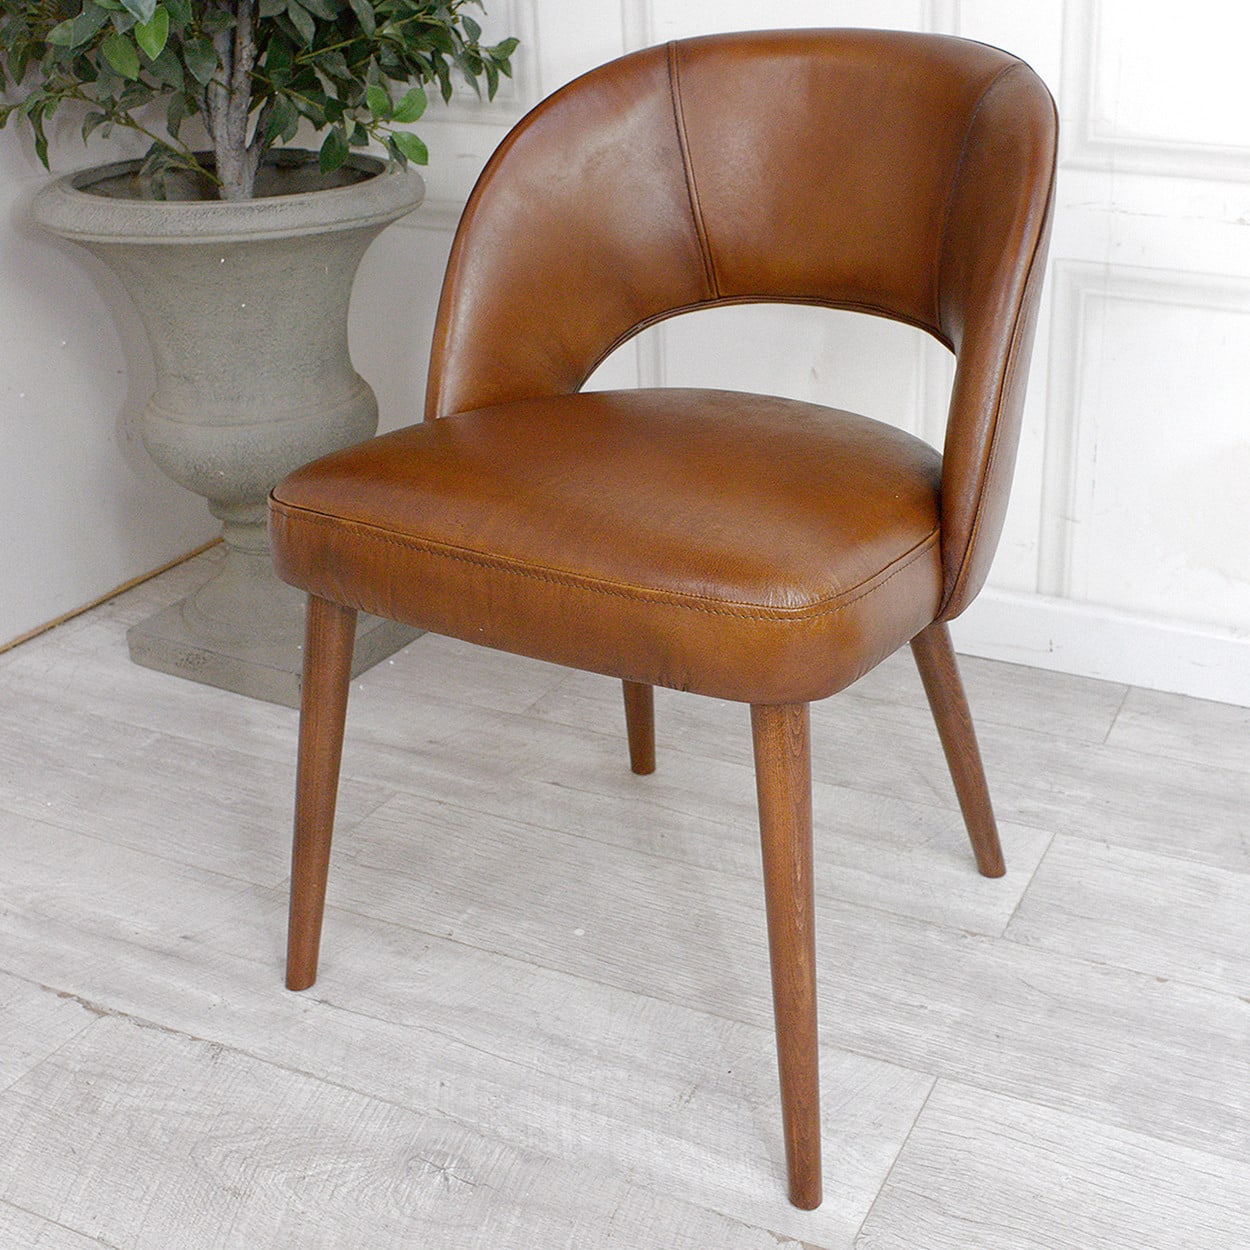 Vintage Leather Tapered Leg Dining Chair